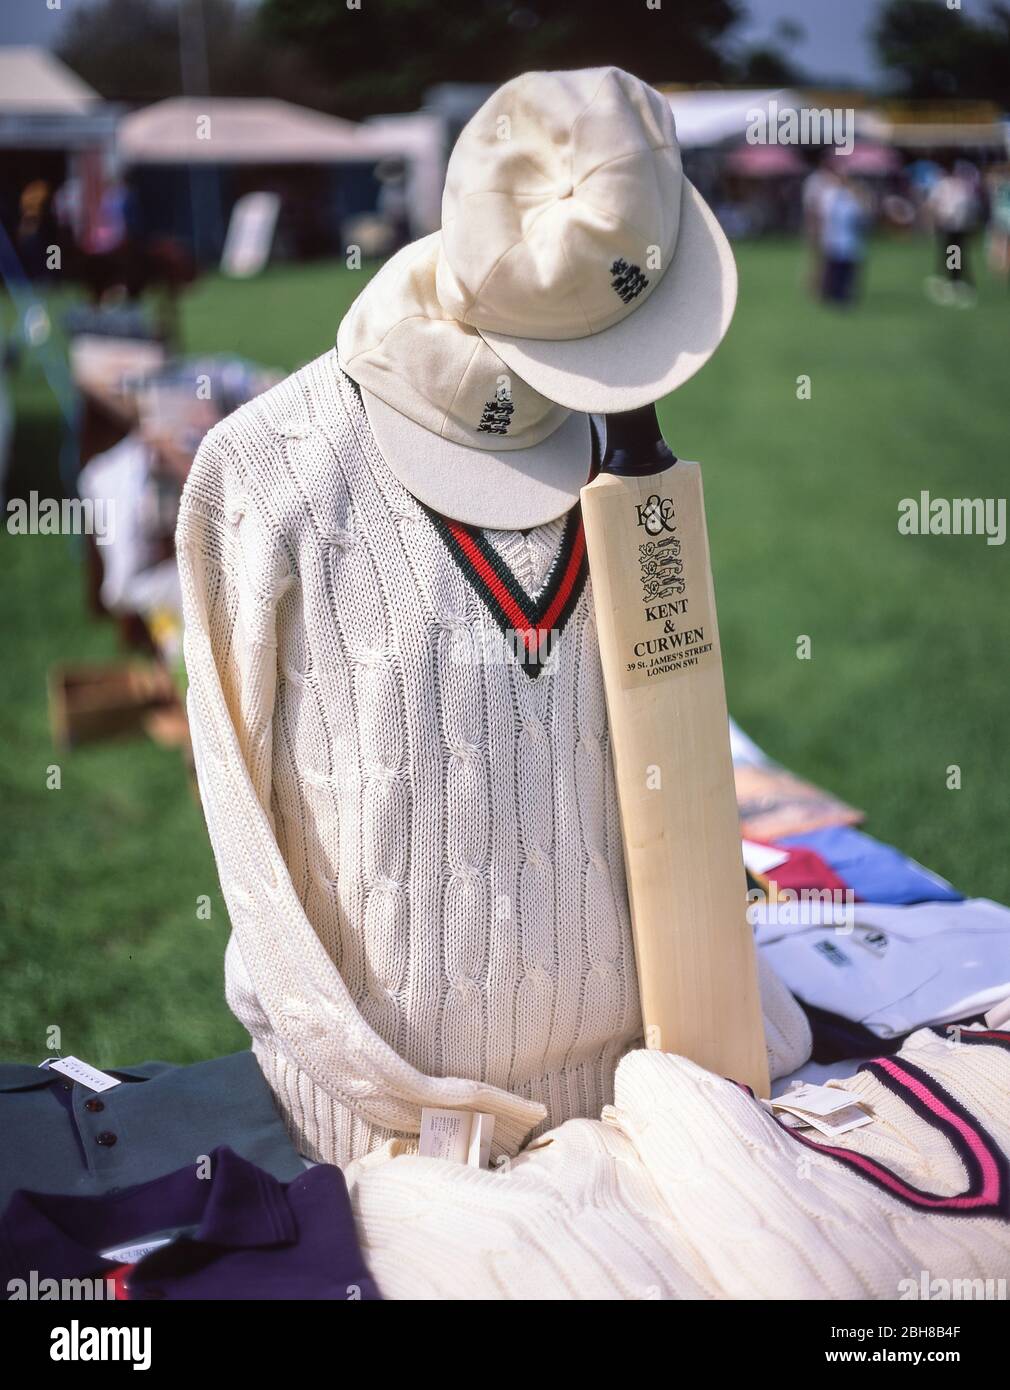 Cricket jumper, bat and cap on stall at The Royal Windsor Horse Show,  Windsor, Berkshire, England, United Kingdom Stock Photo - Alamy